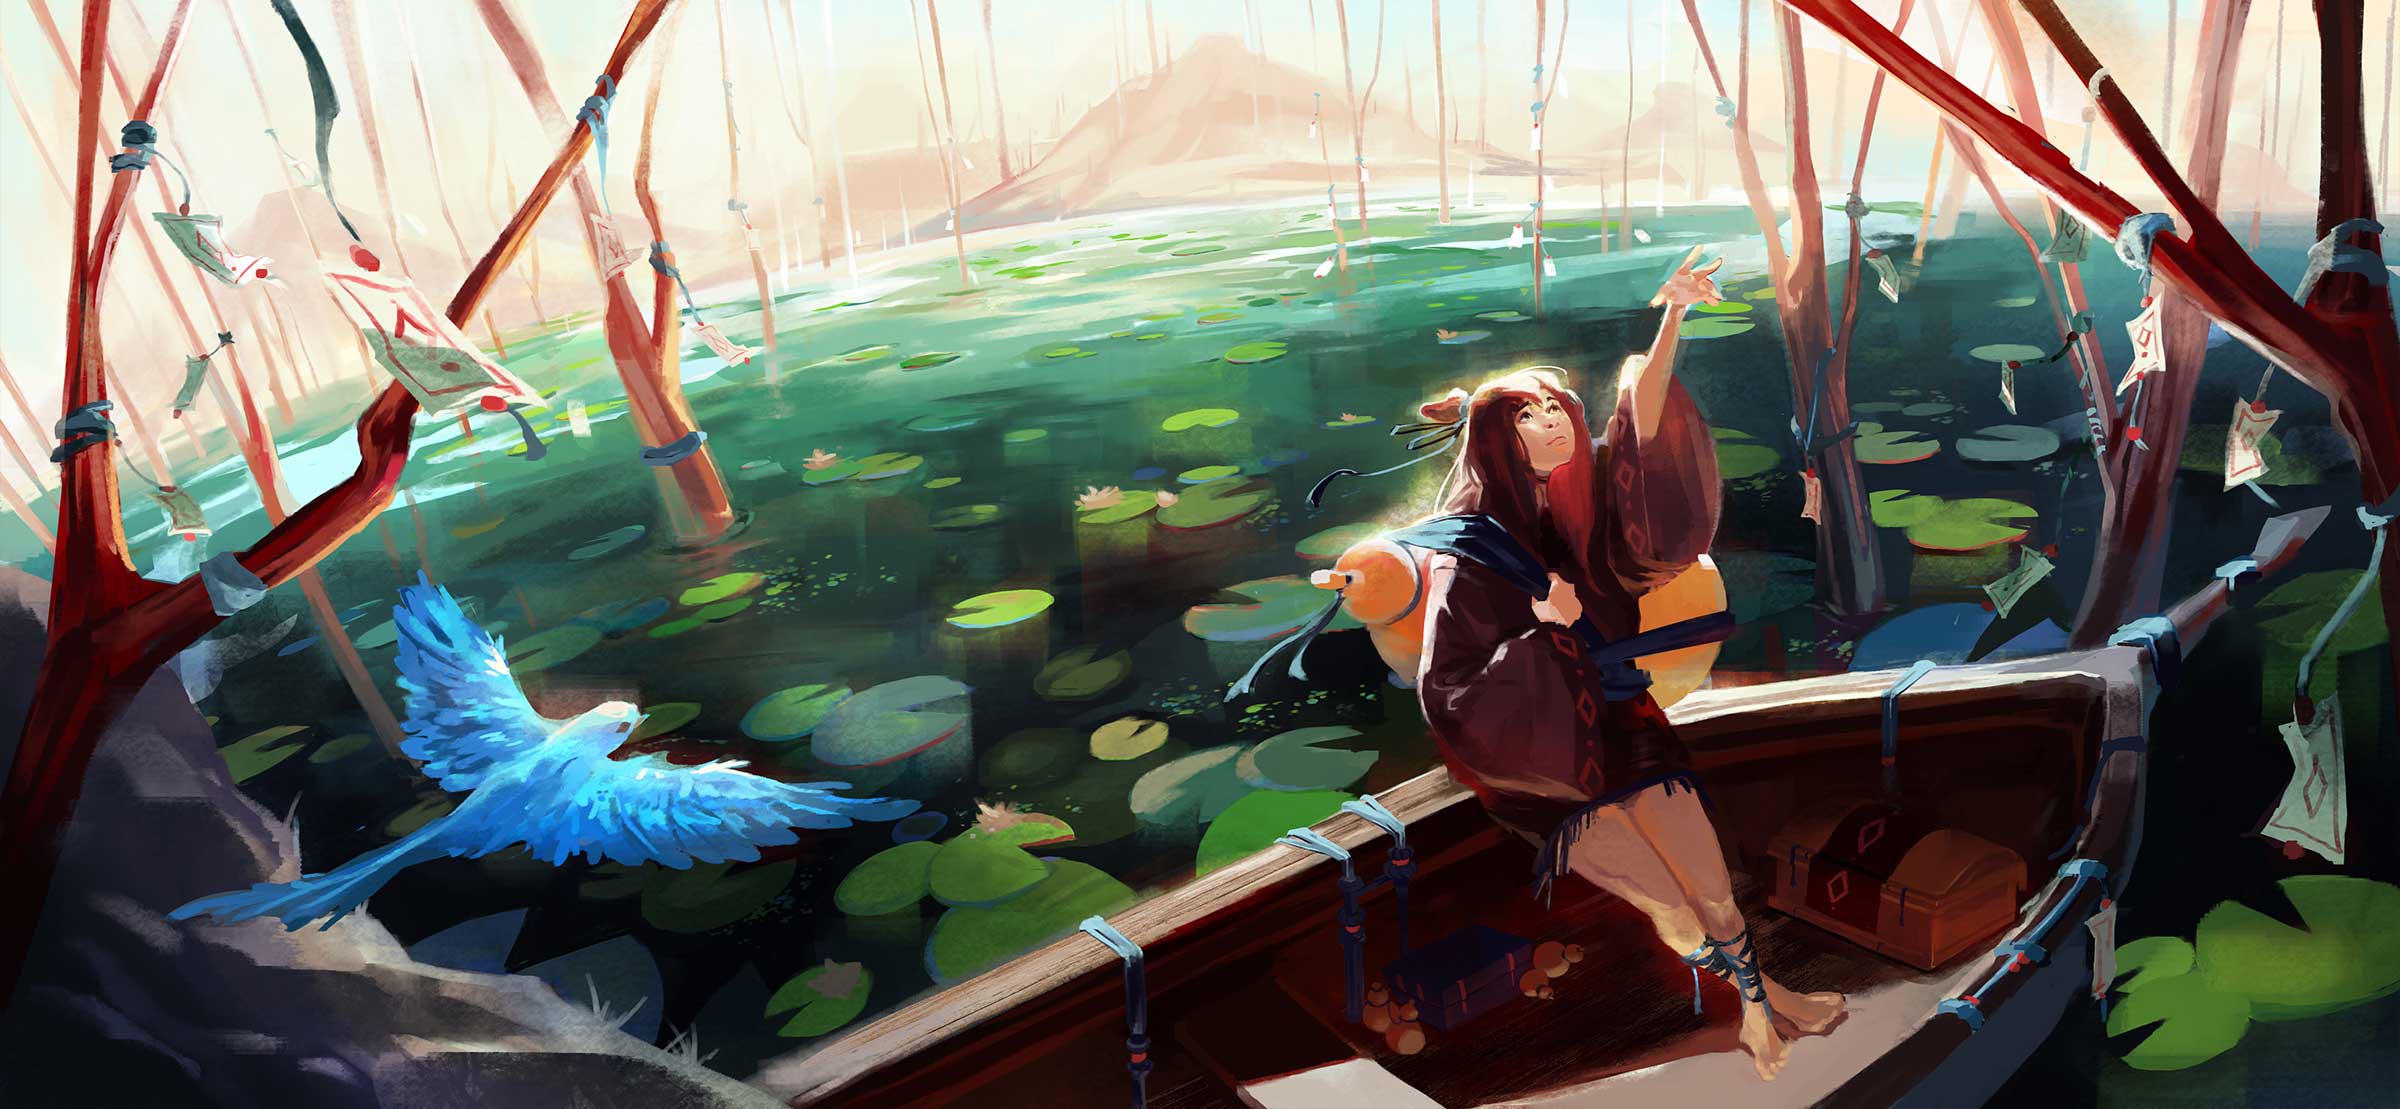 A girl sits on the edge of a rowboat floating in a lake with lily pads.